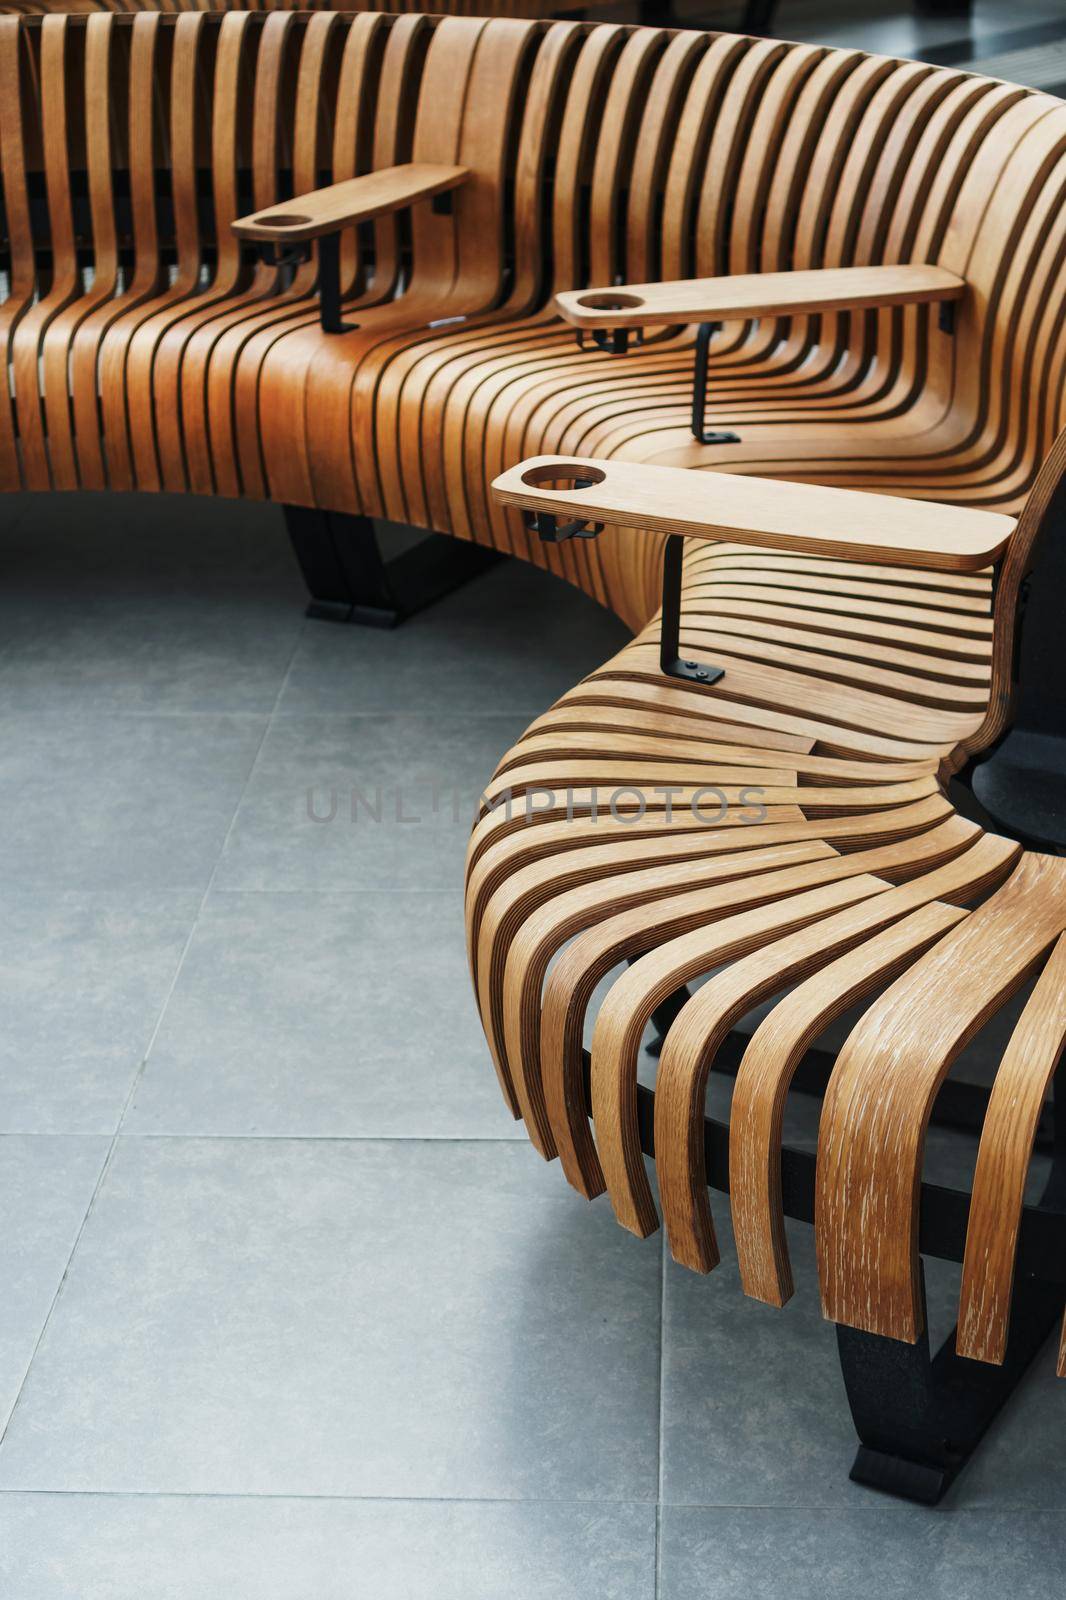 Modern curved wooden bench at the airport. Modern interior